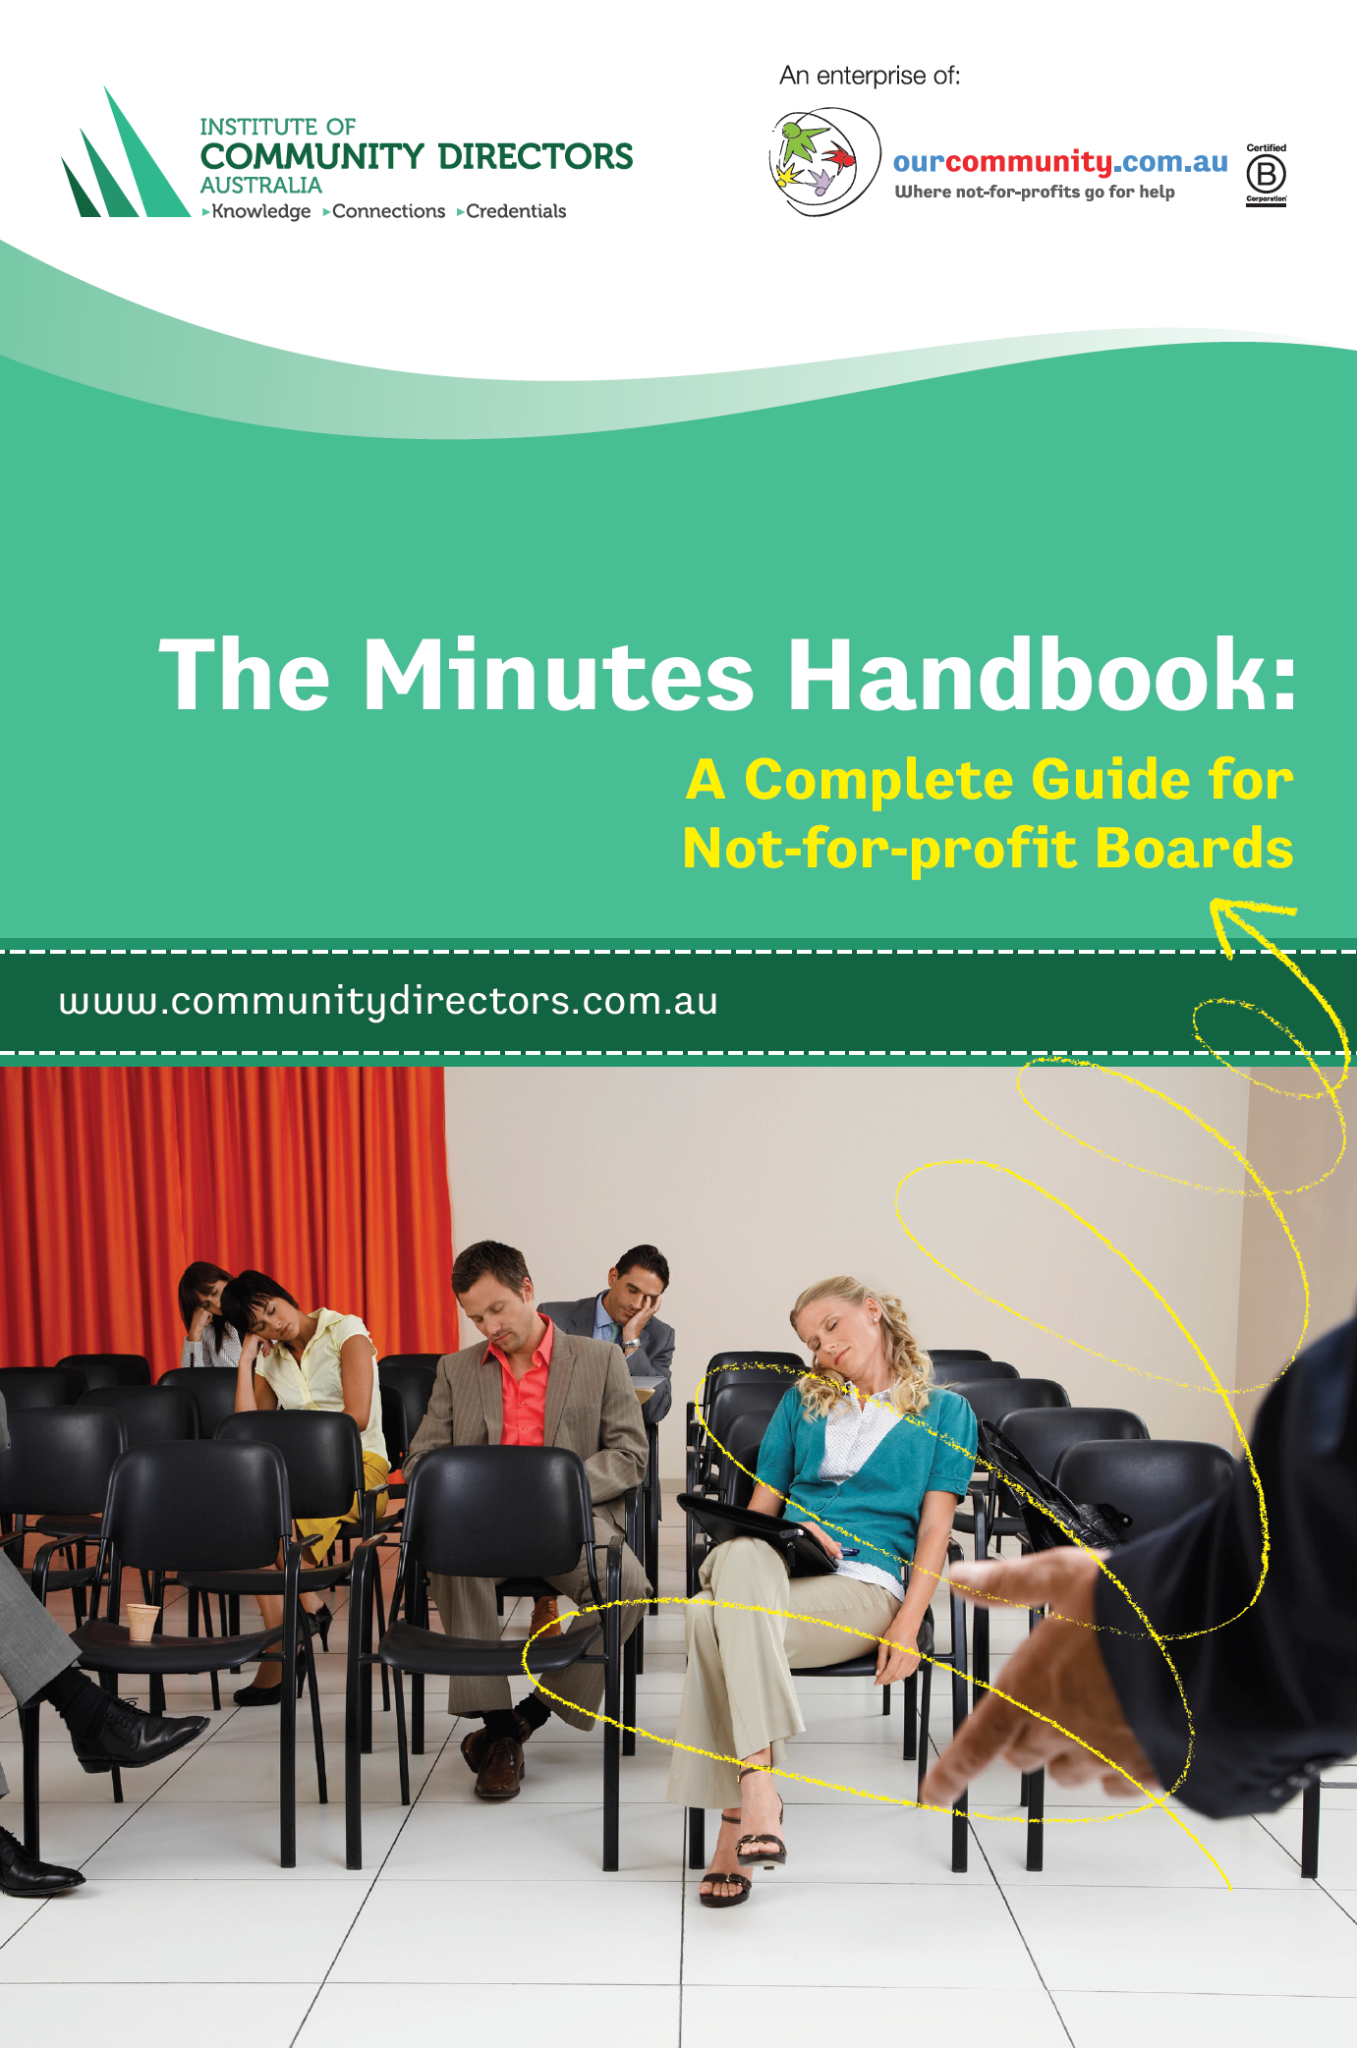 The Minutes Handbook: A Complete Guide for Not-for-profit Boards